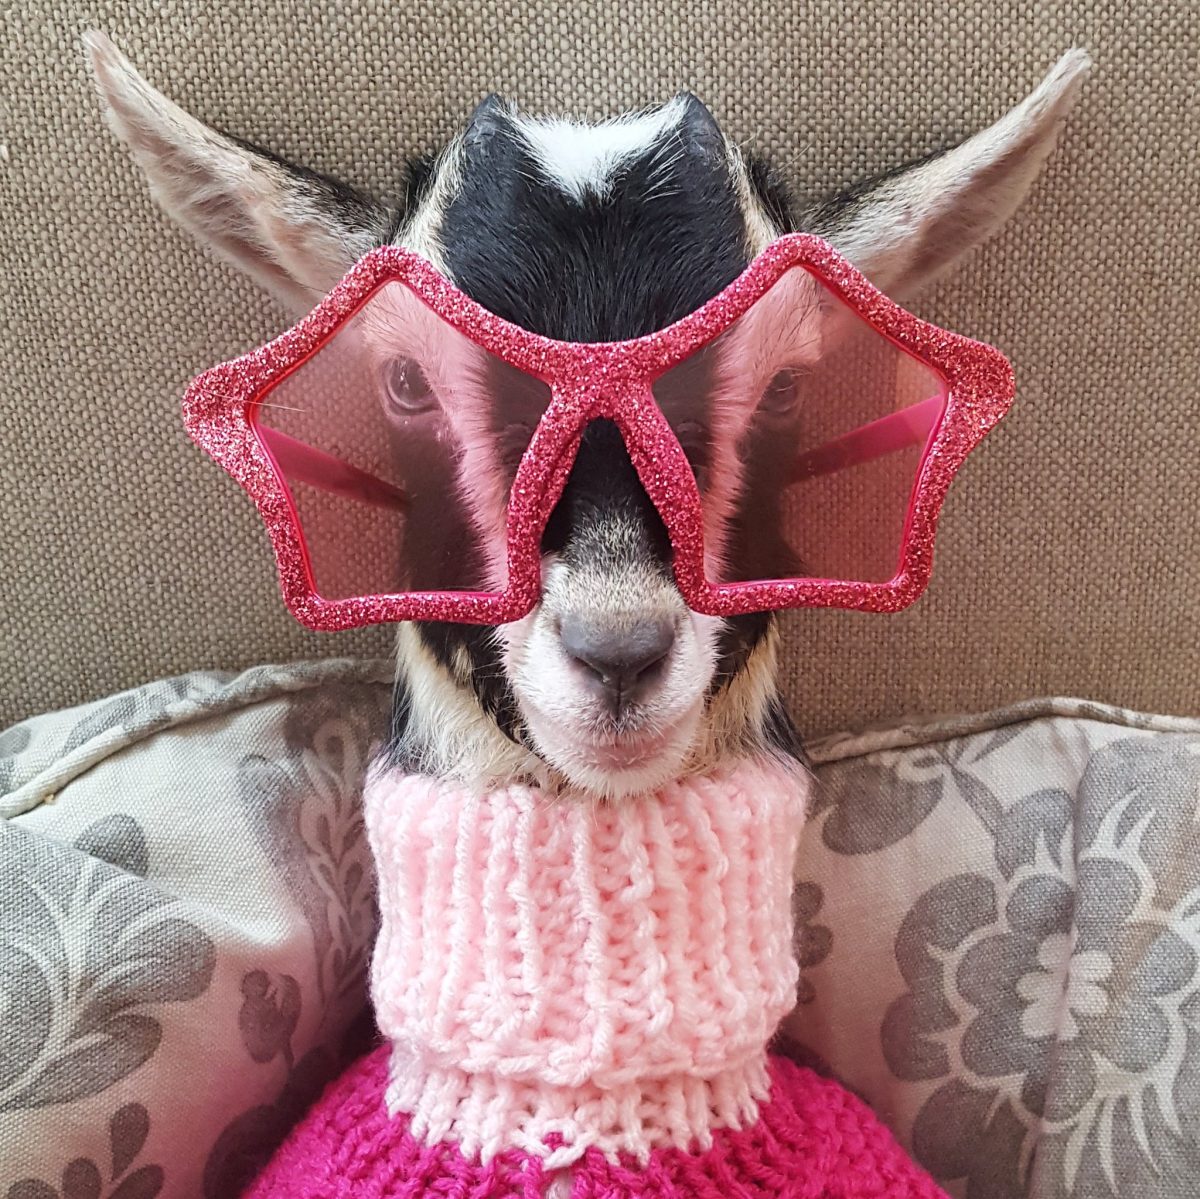 Polly Appears More Comfortable Dressed Up - Source: Twitter/Goats of Anarchy